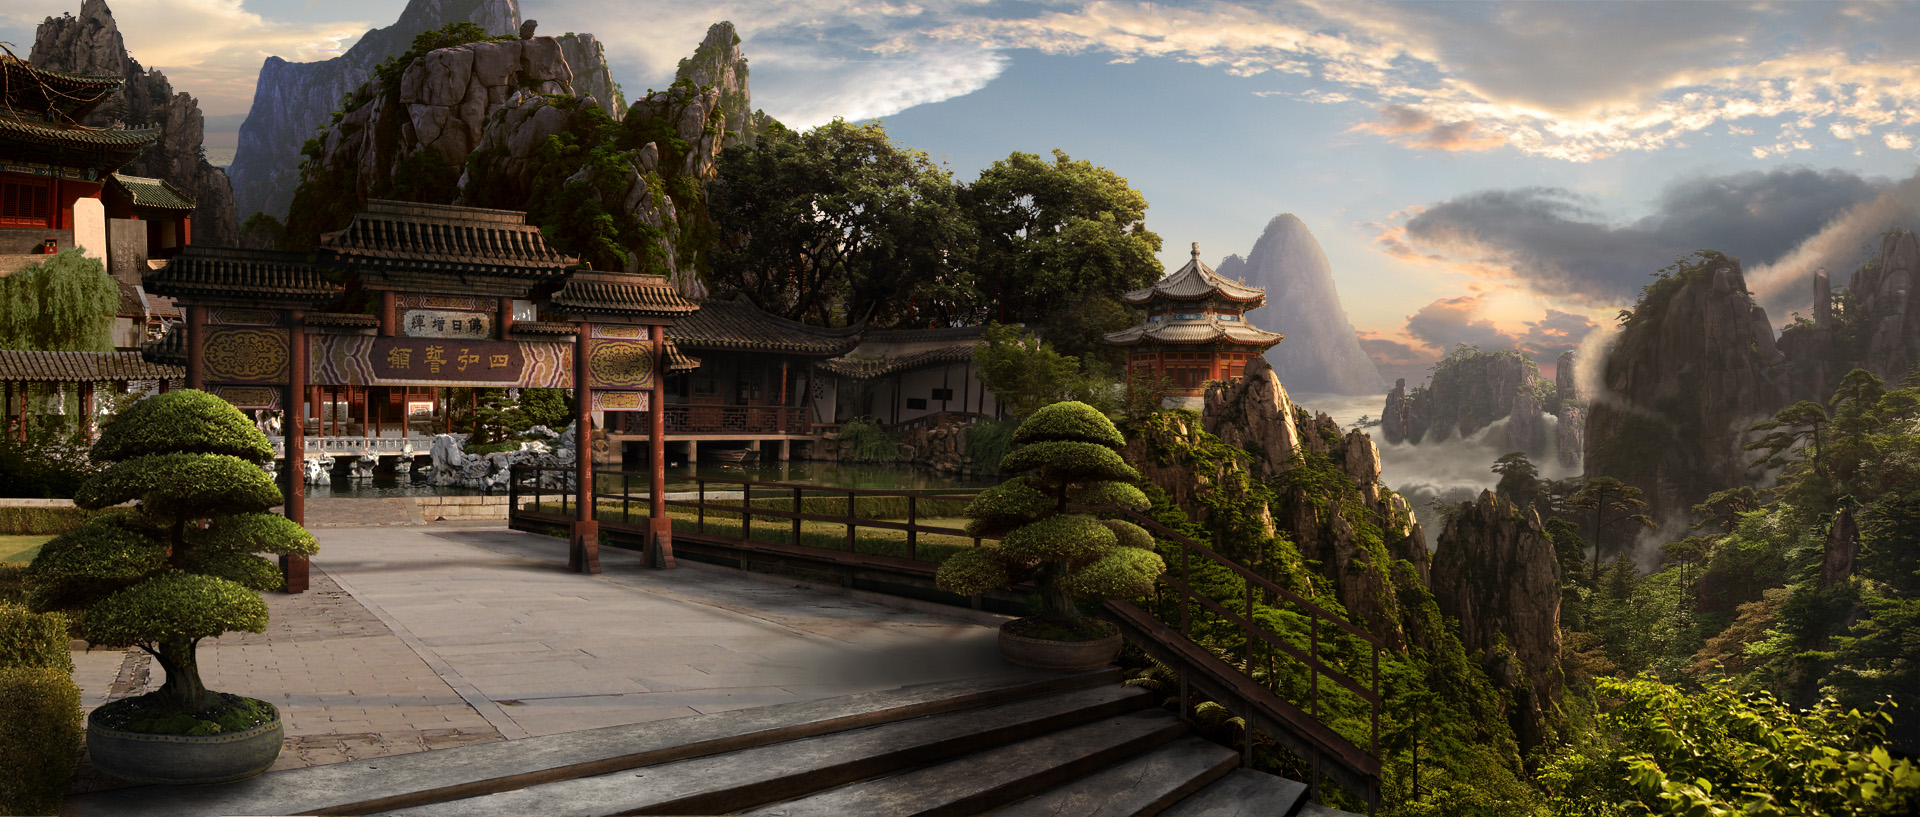 Shaolin Wallpaper And Background Image